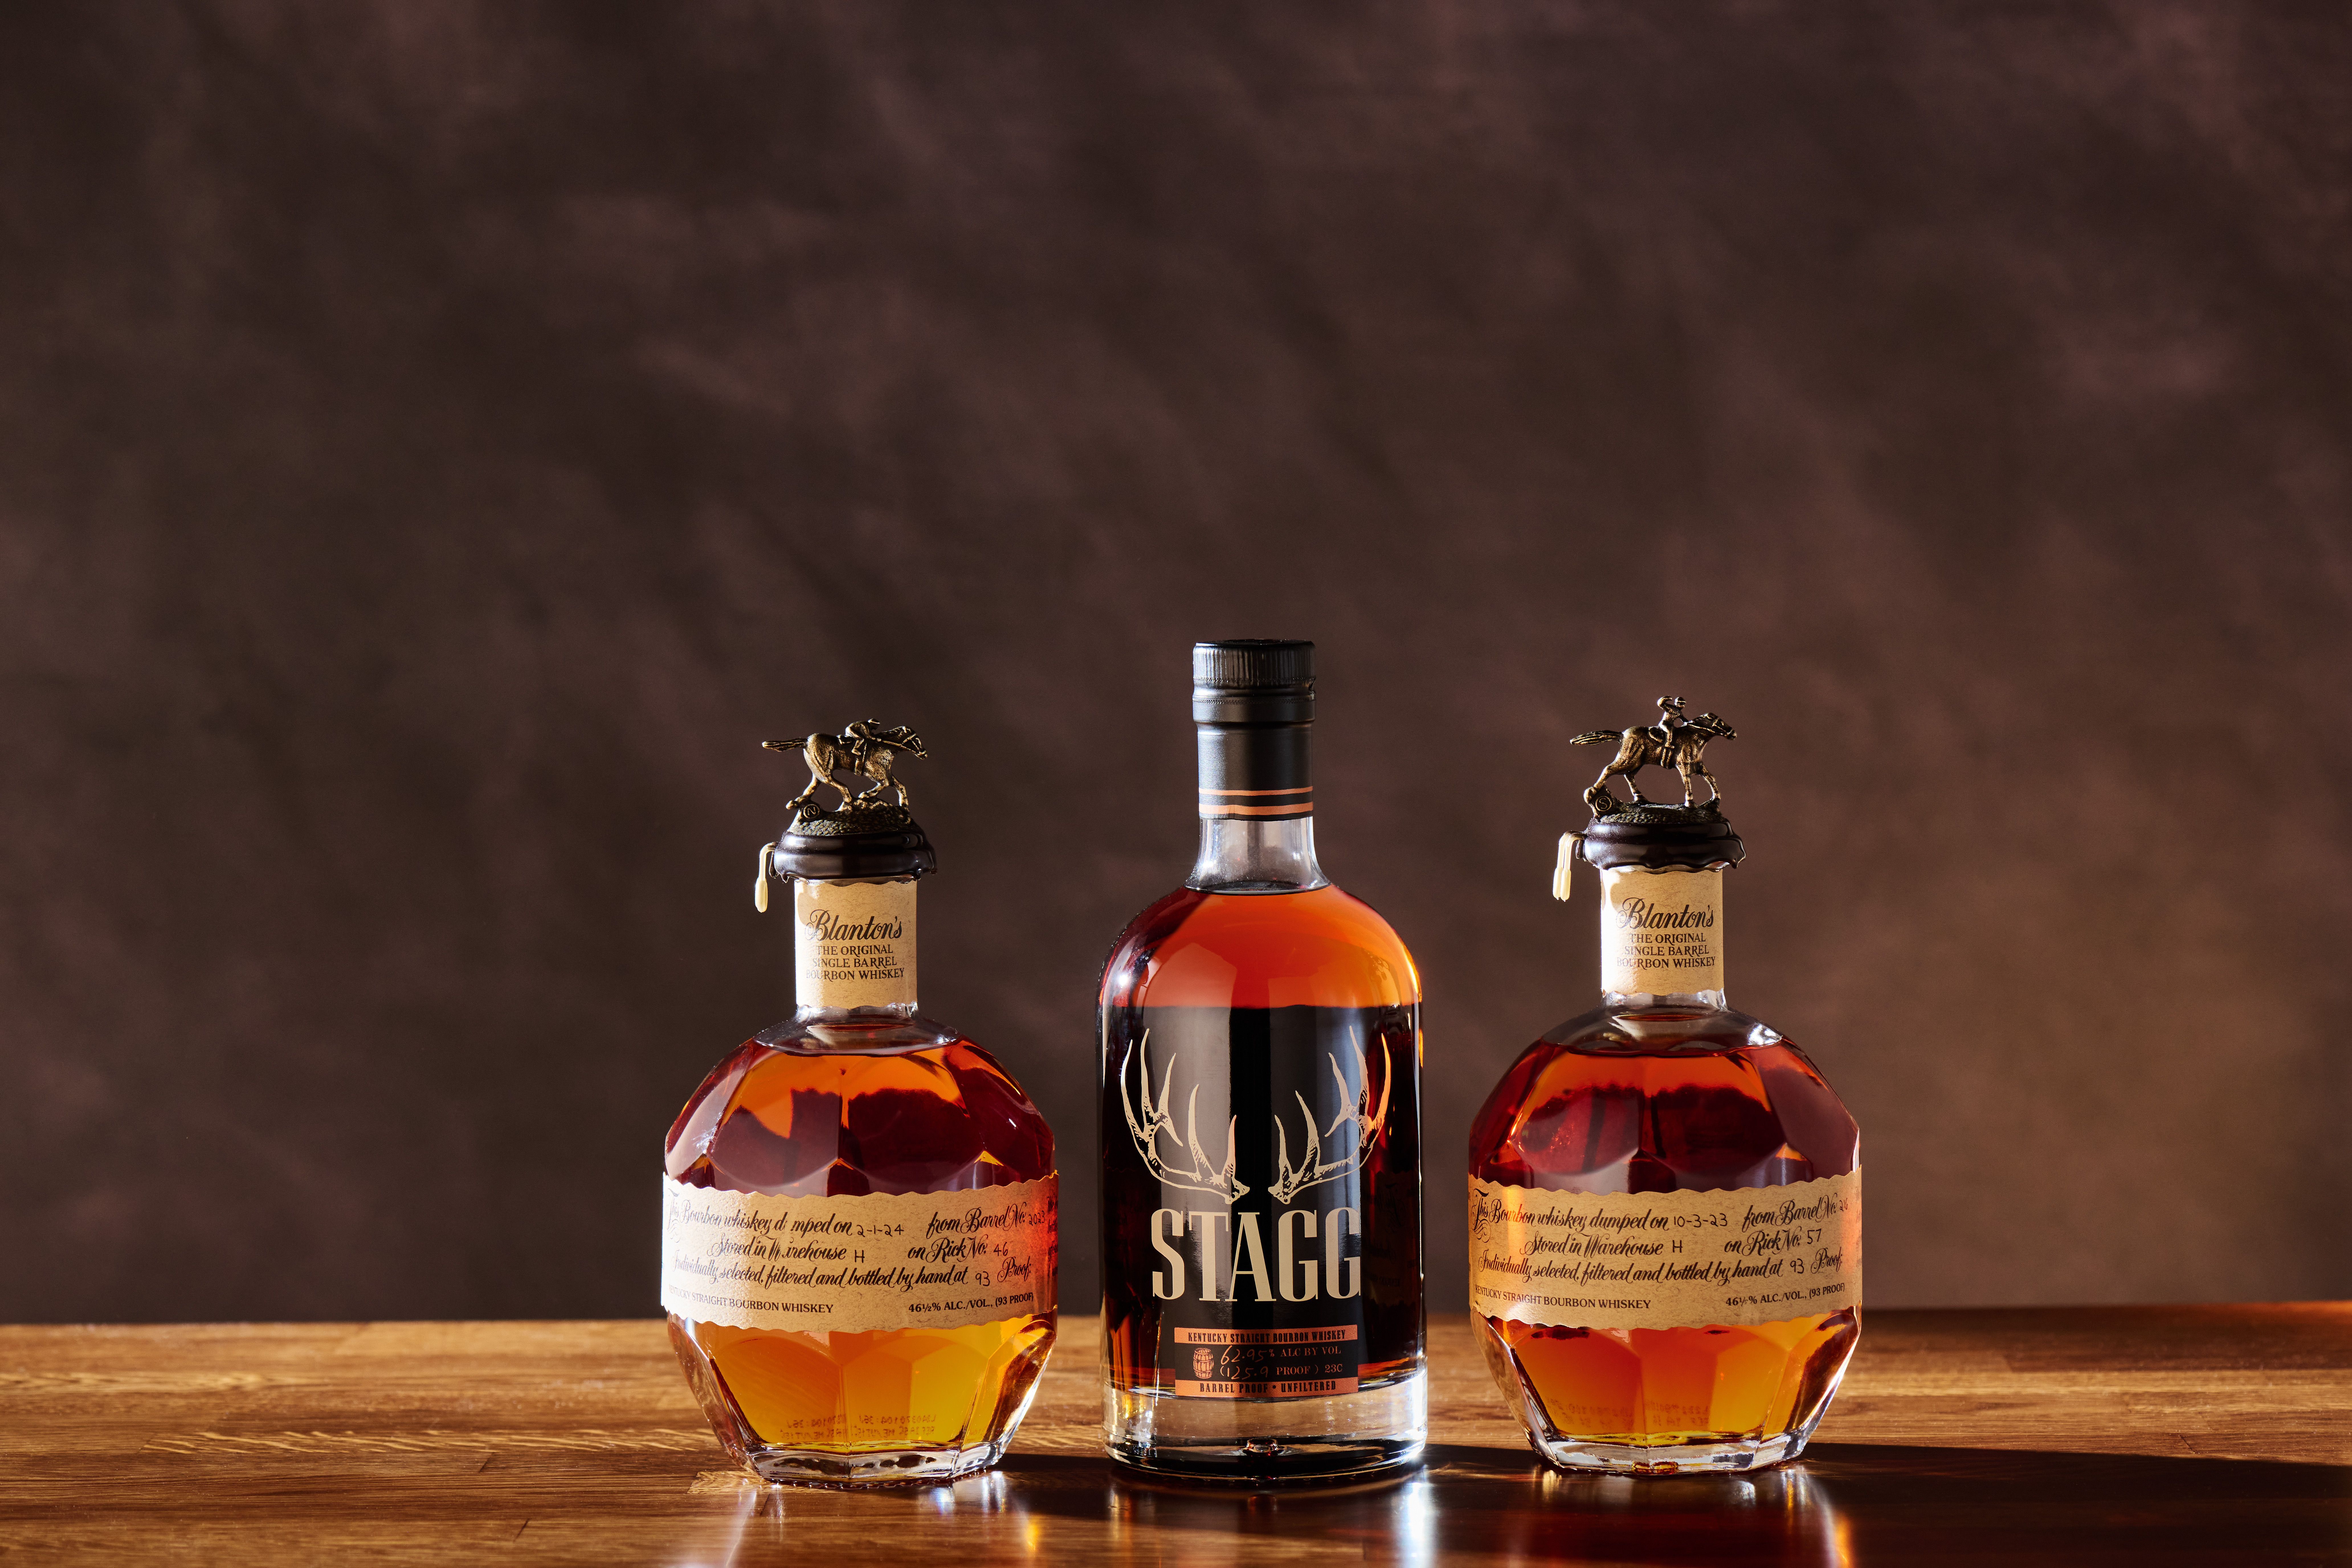 8. Stagg Jr and Blanton's